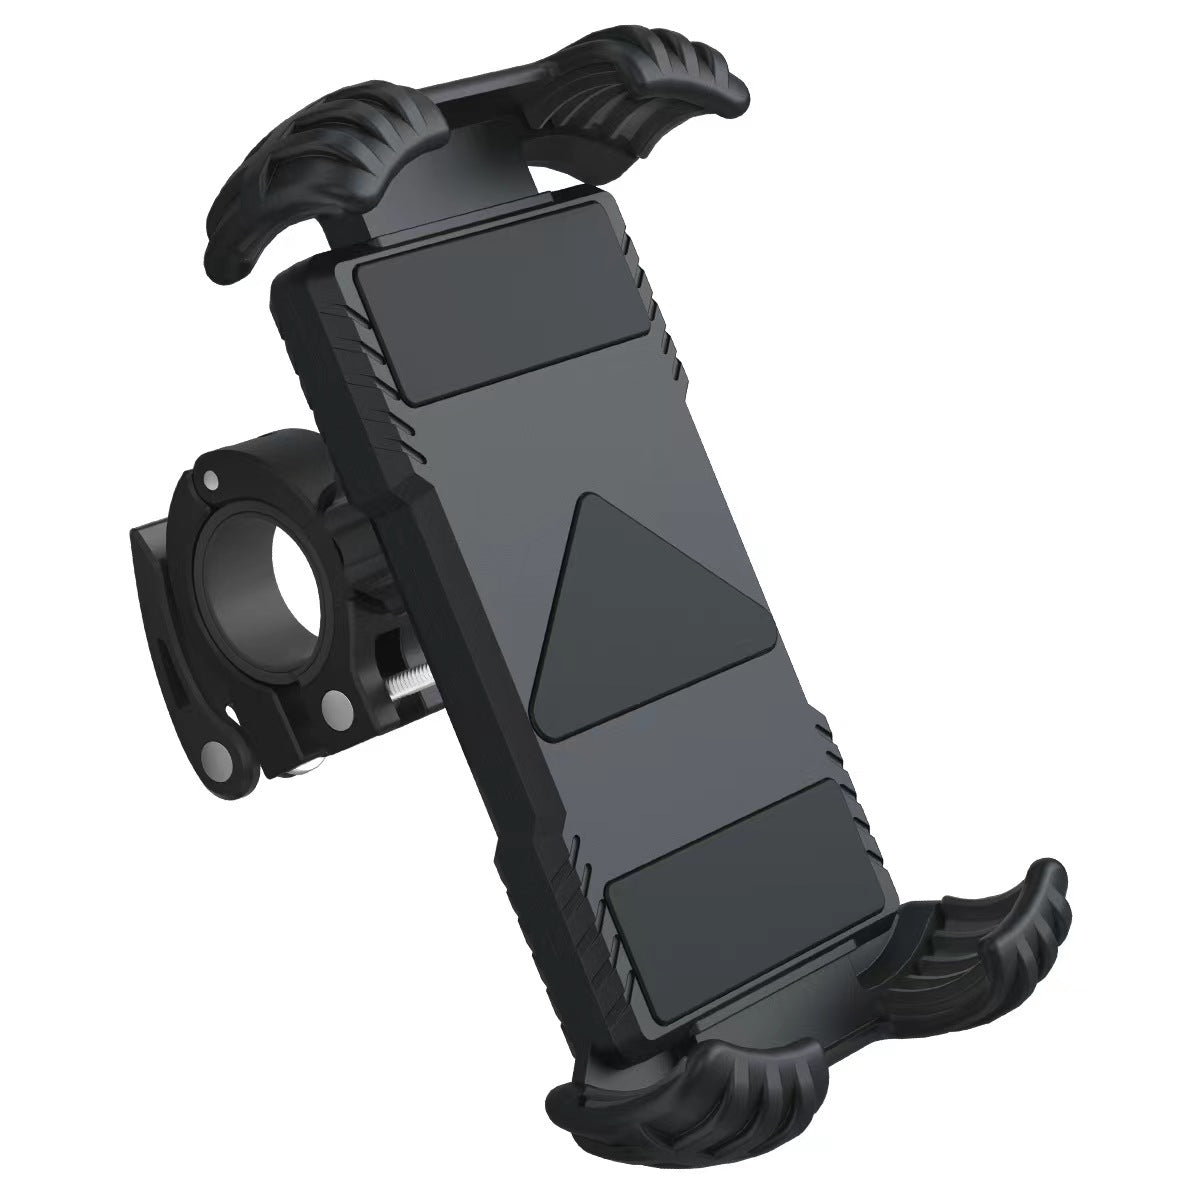 Car shockproof and drop-proof cell phone holder